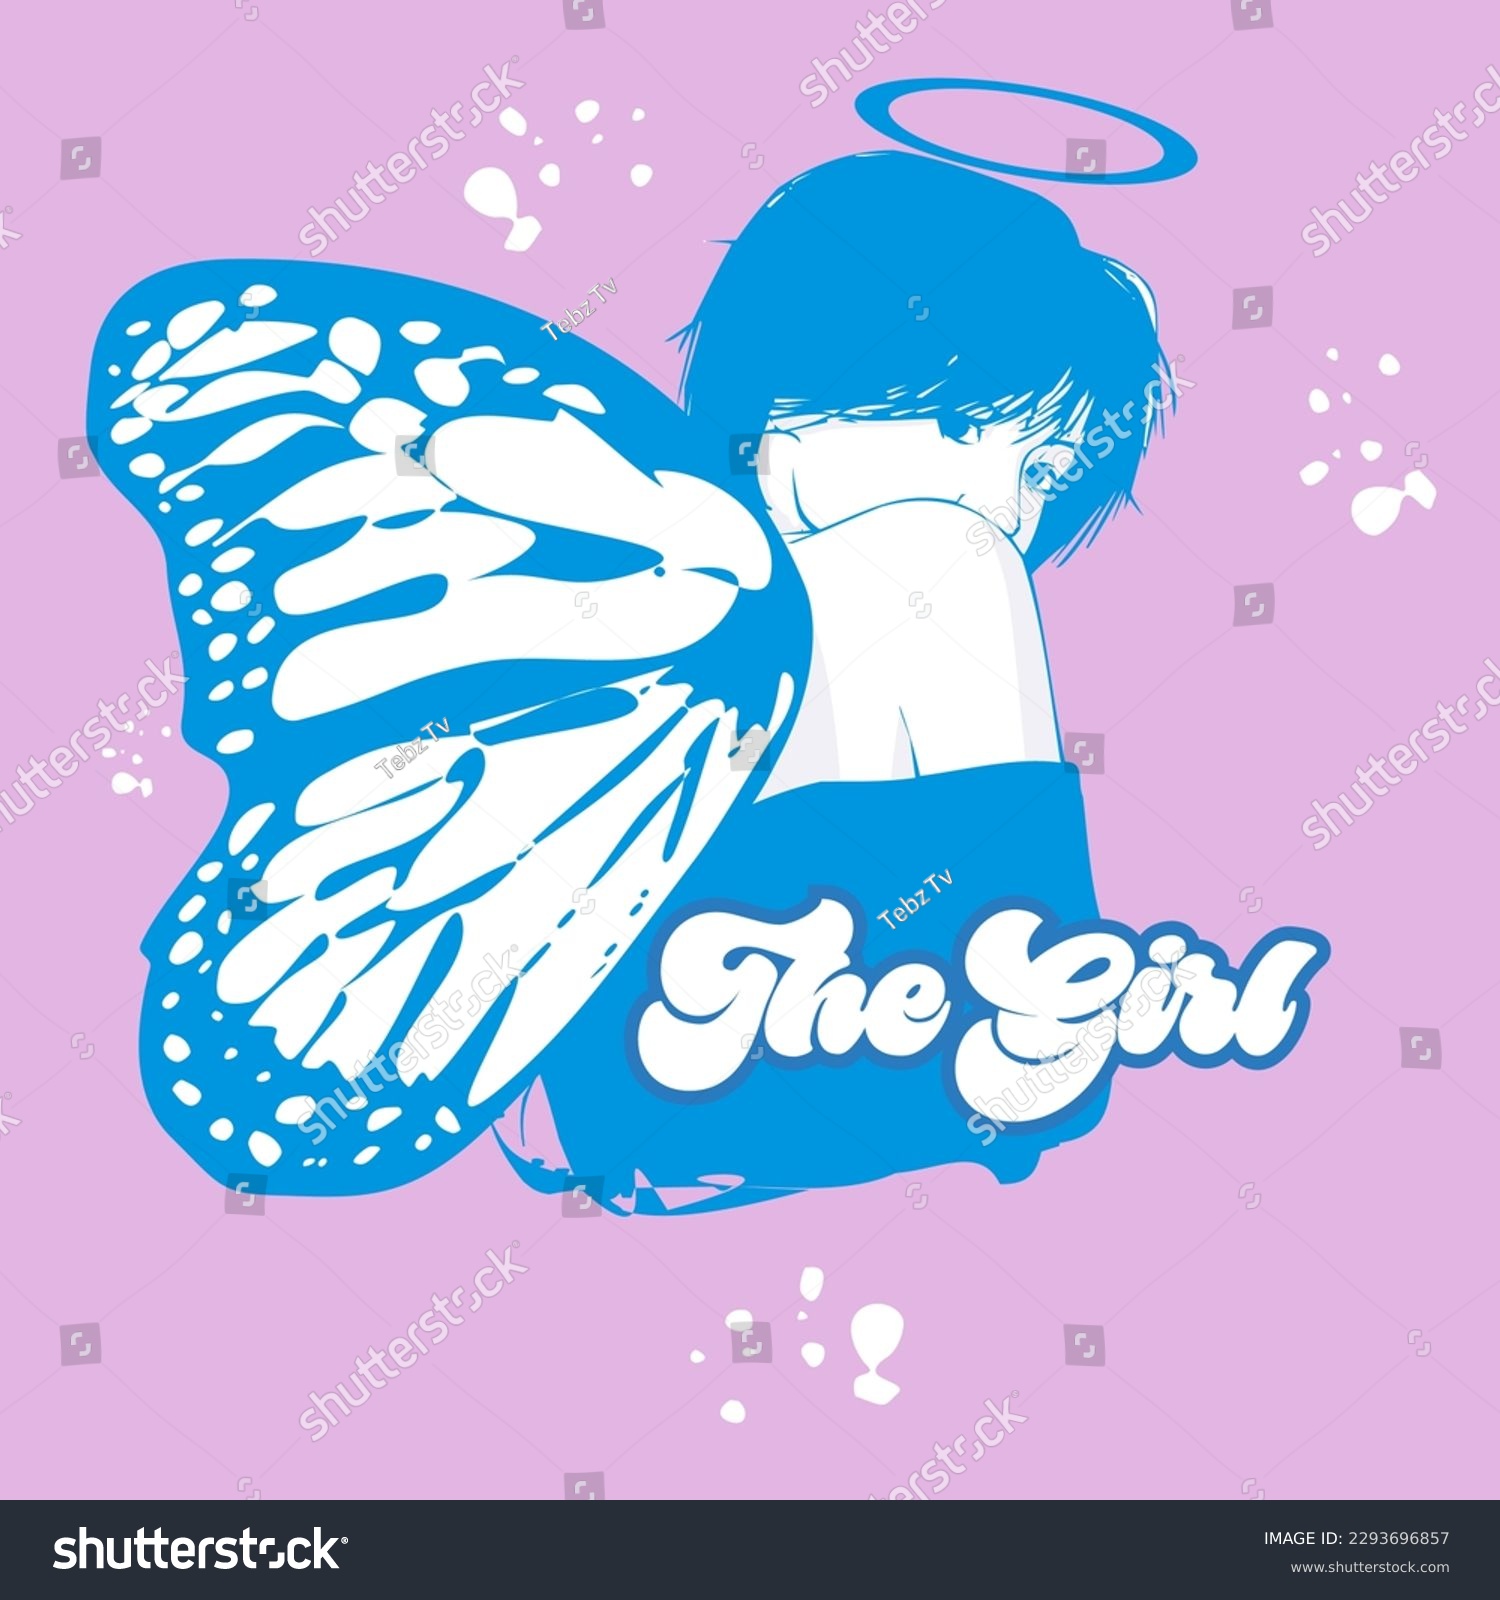 SVG of Illustration of a girl with butterfly wing EPS 10 Editable Vector svg